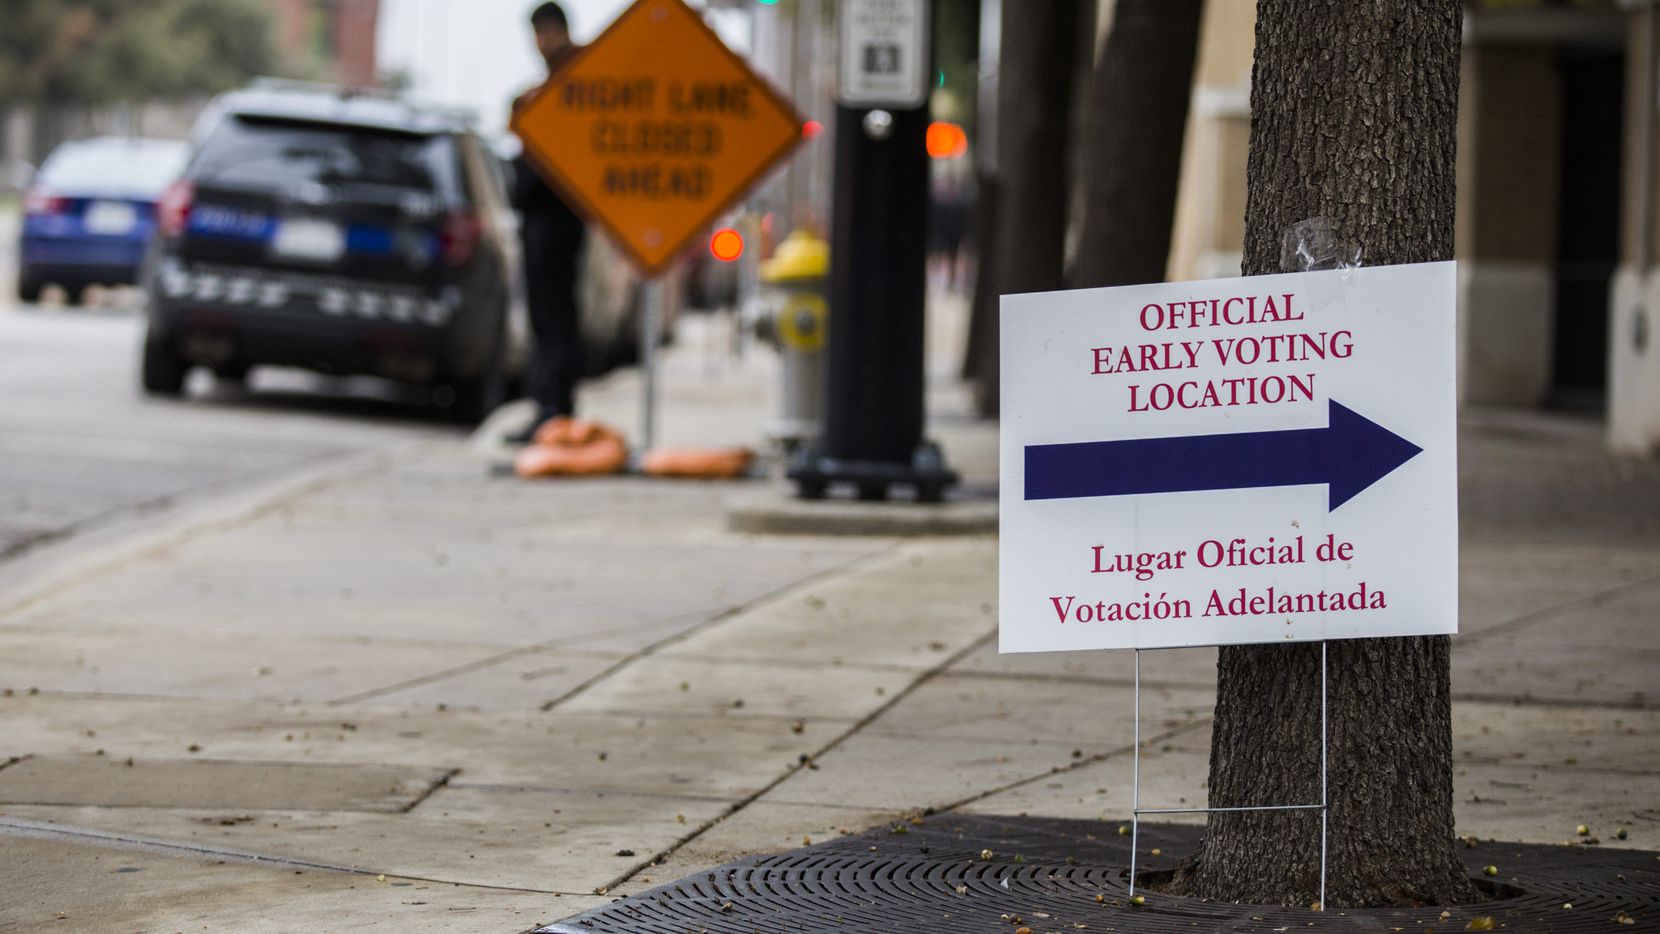 A sign for early voting stands outside El Centro College on Tuesday, October 29, 2019 in downtown Dallas. (Ashley Landis/The Dallas Morning News)